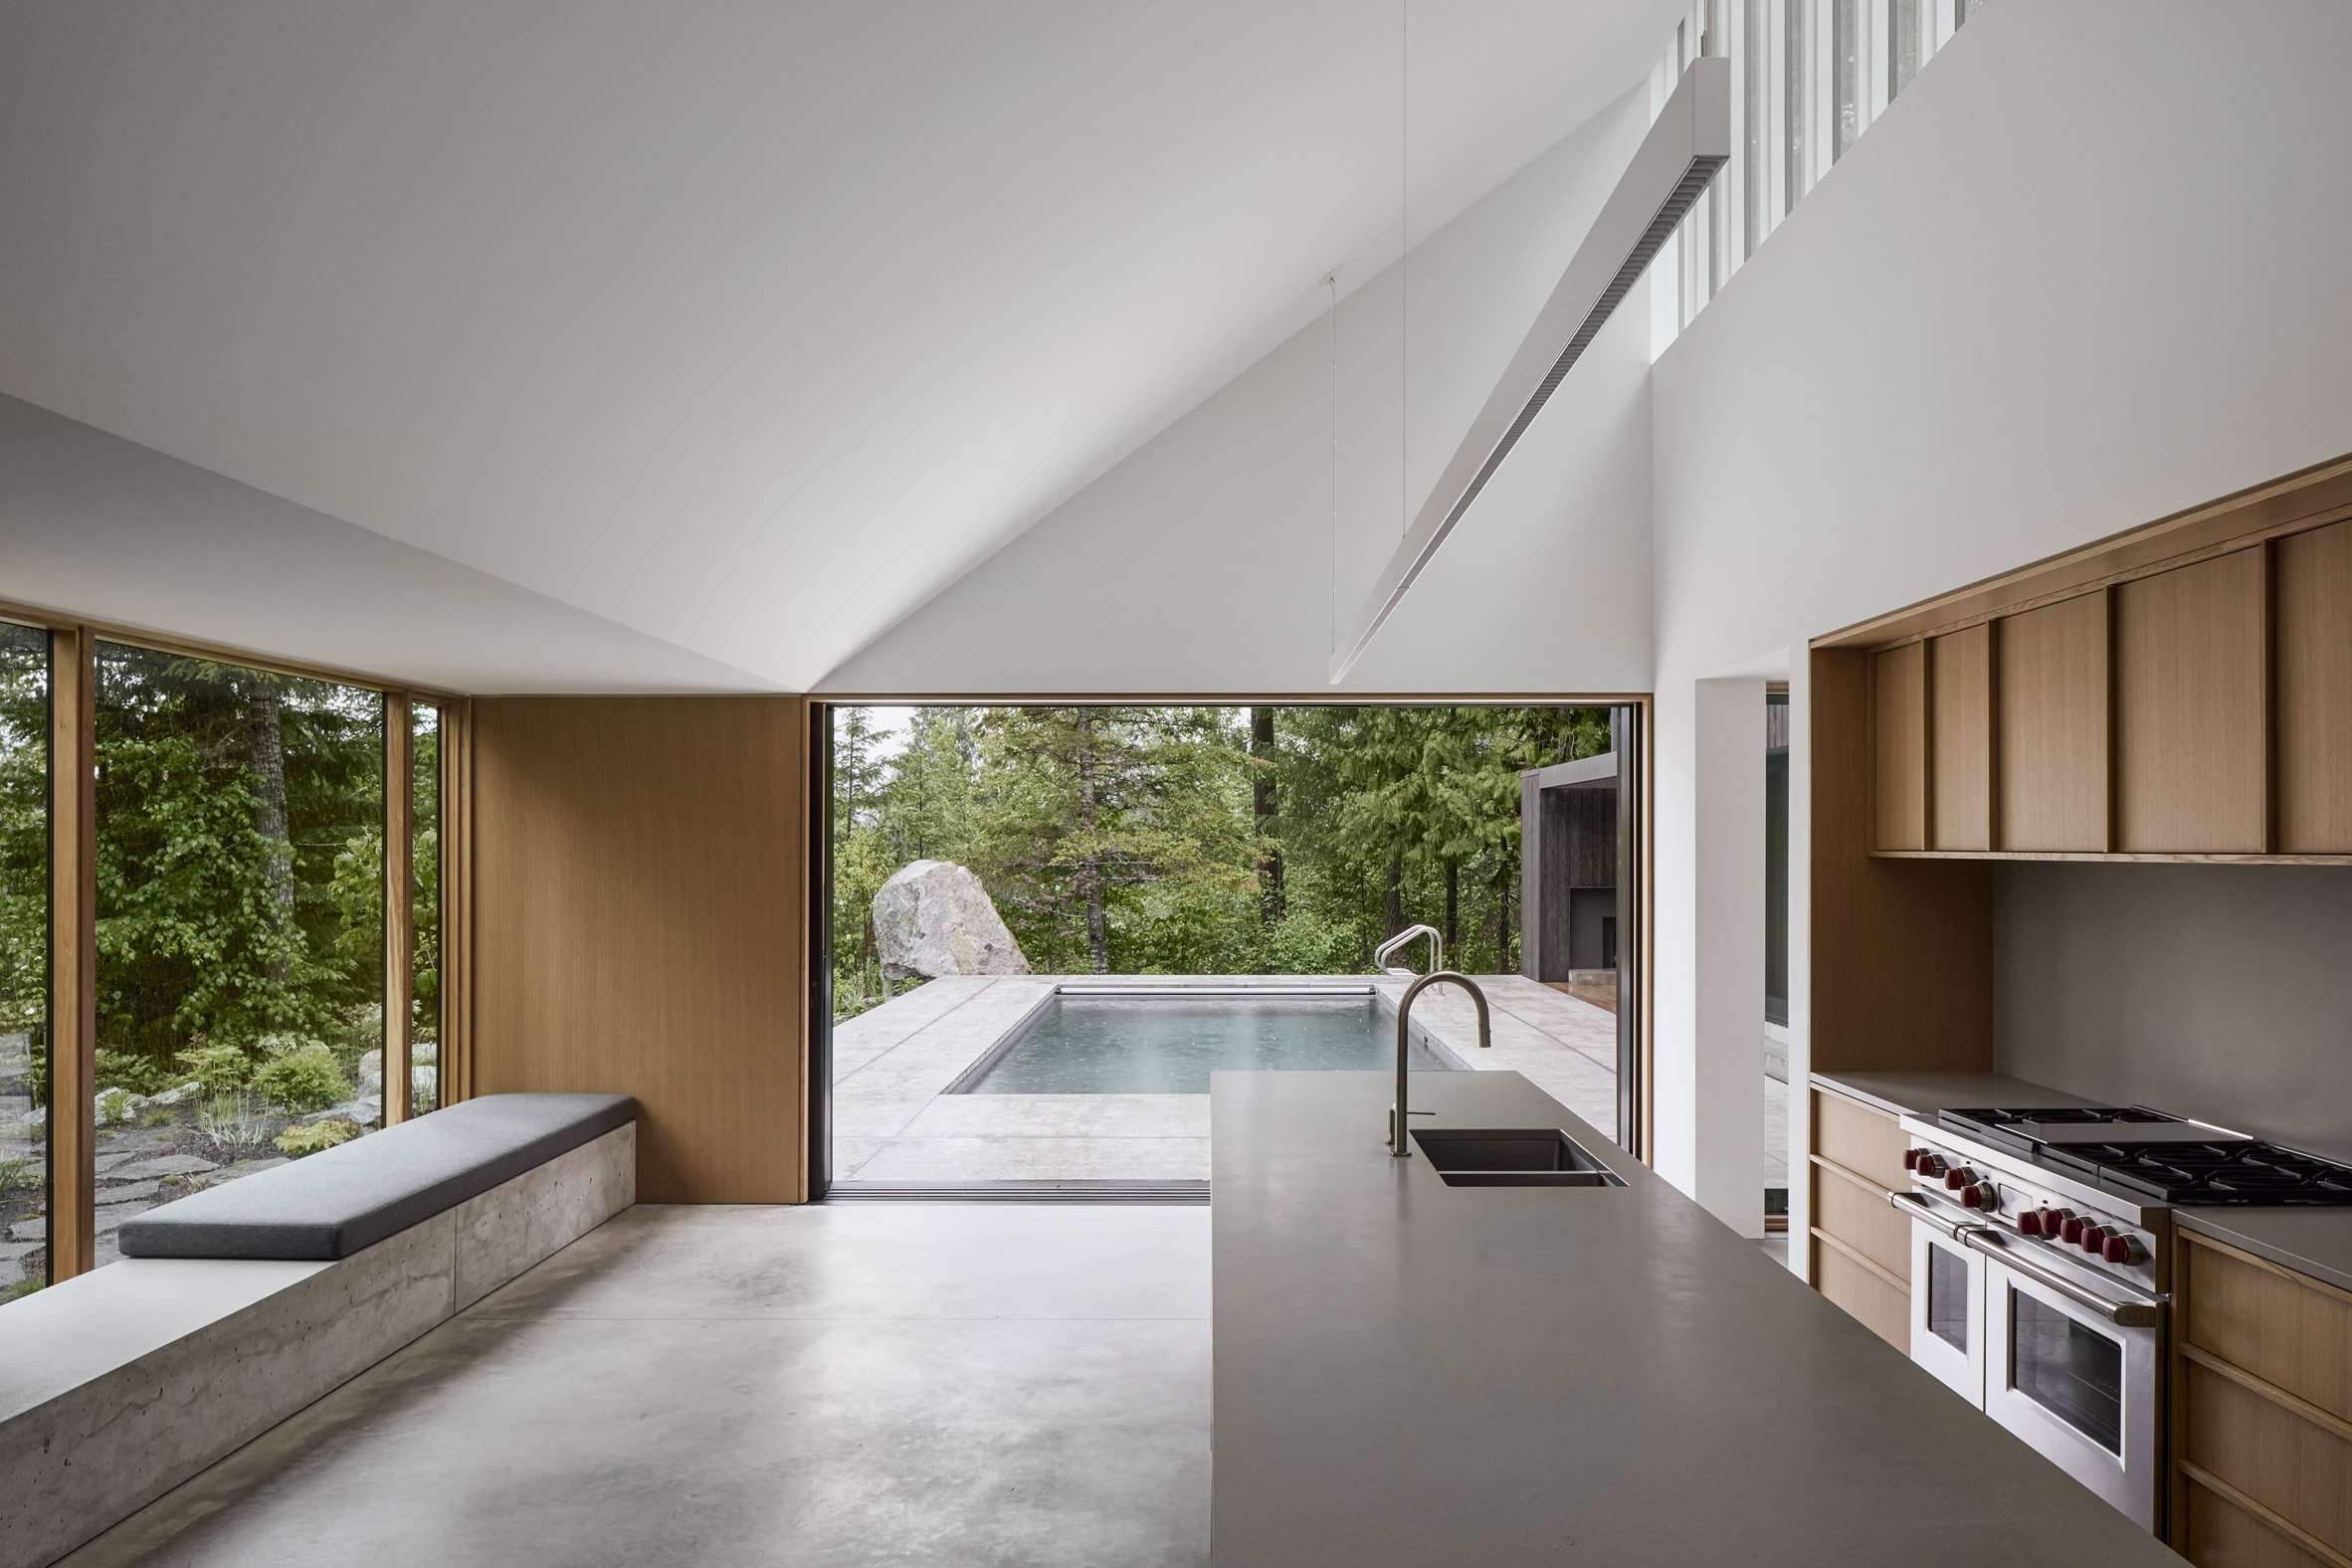 Open-plan kitchen illuminated by skylights, which opens onto a terrace with a long swimming pool